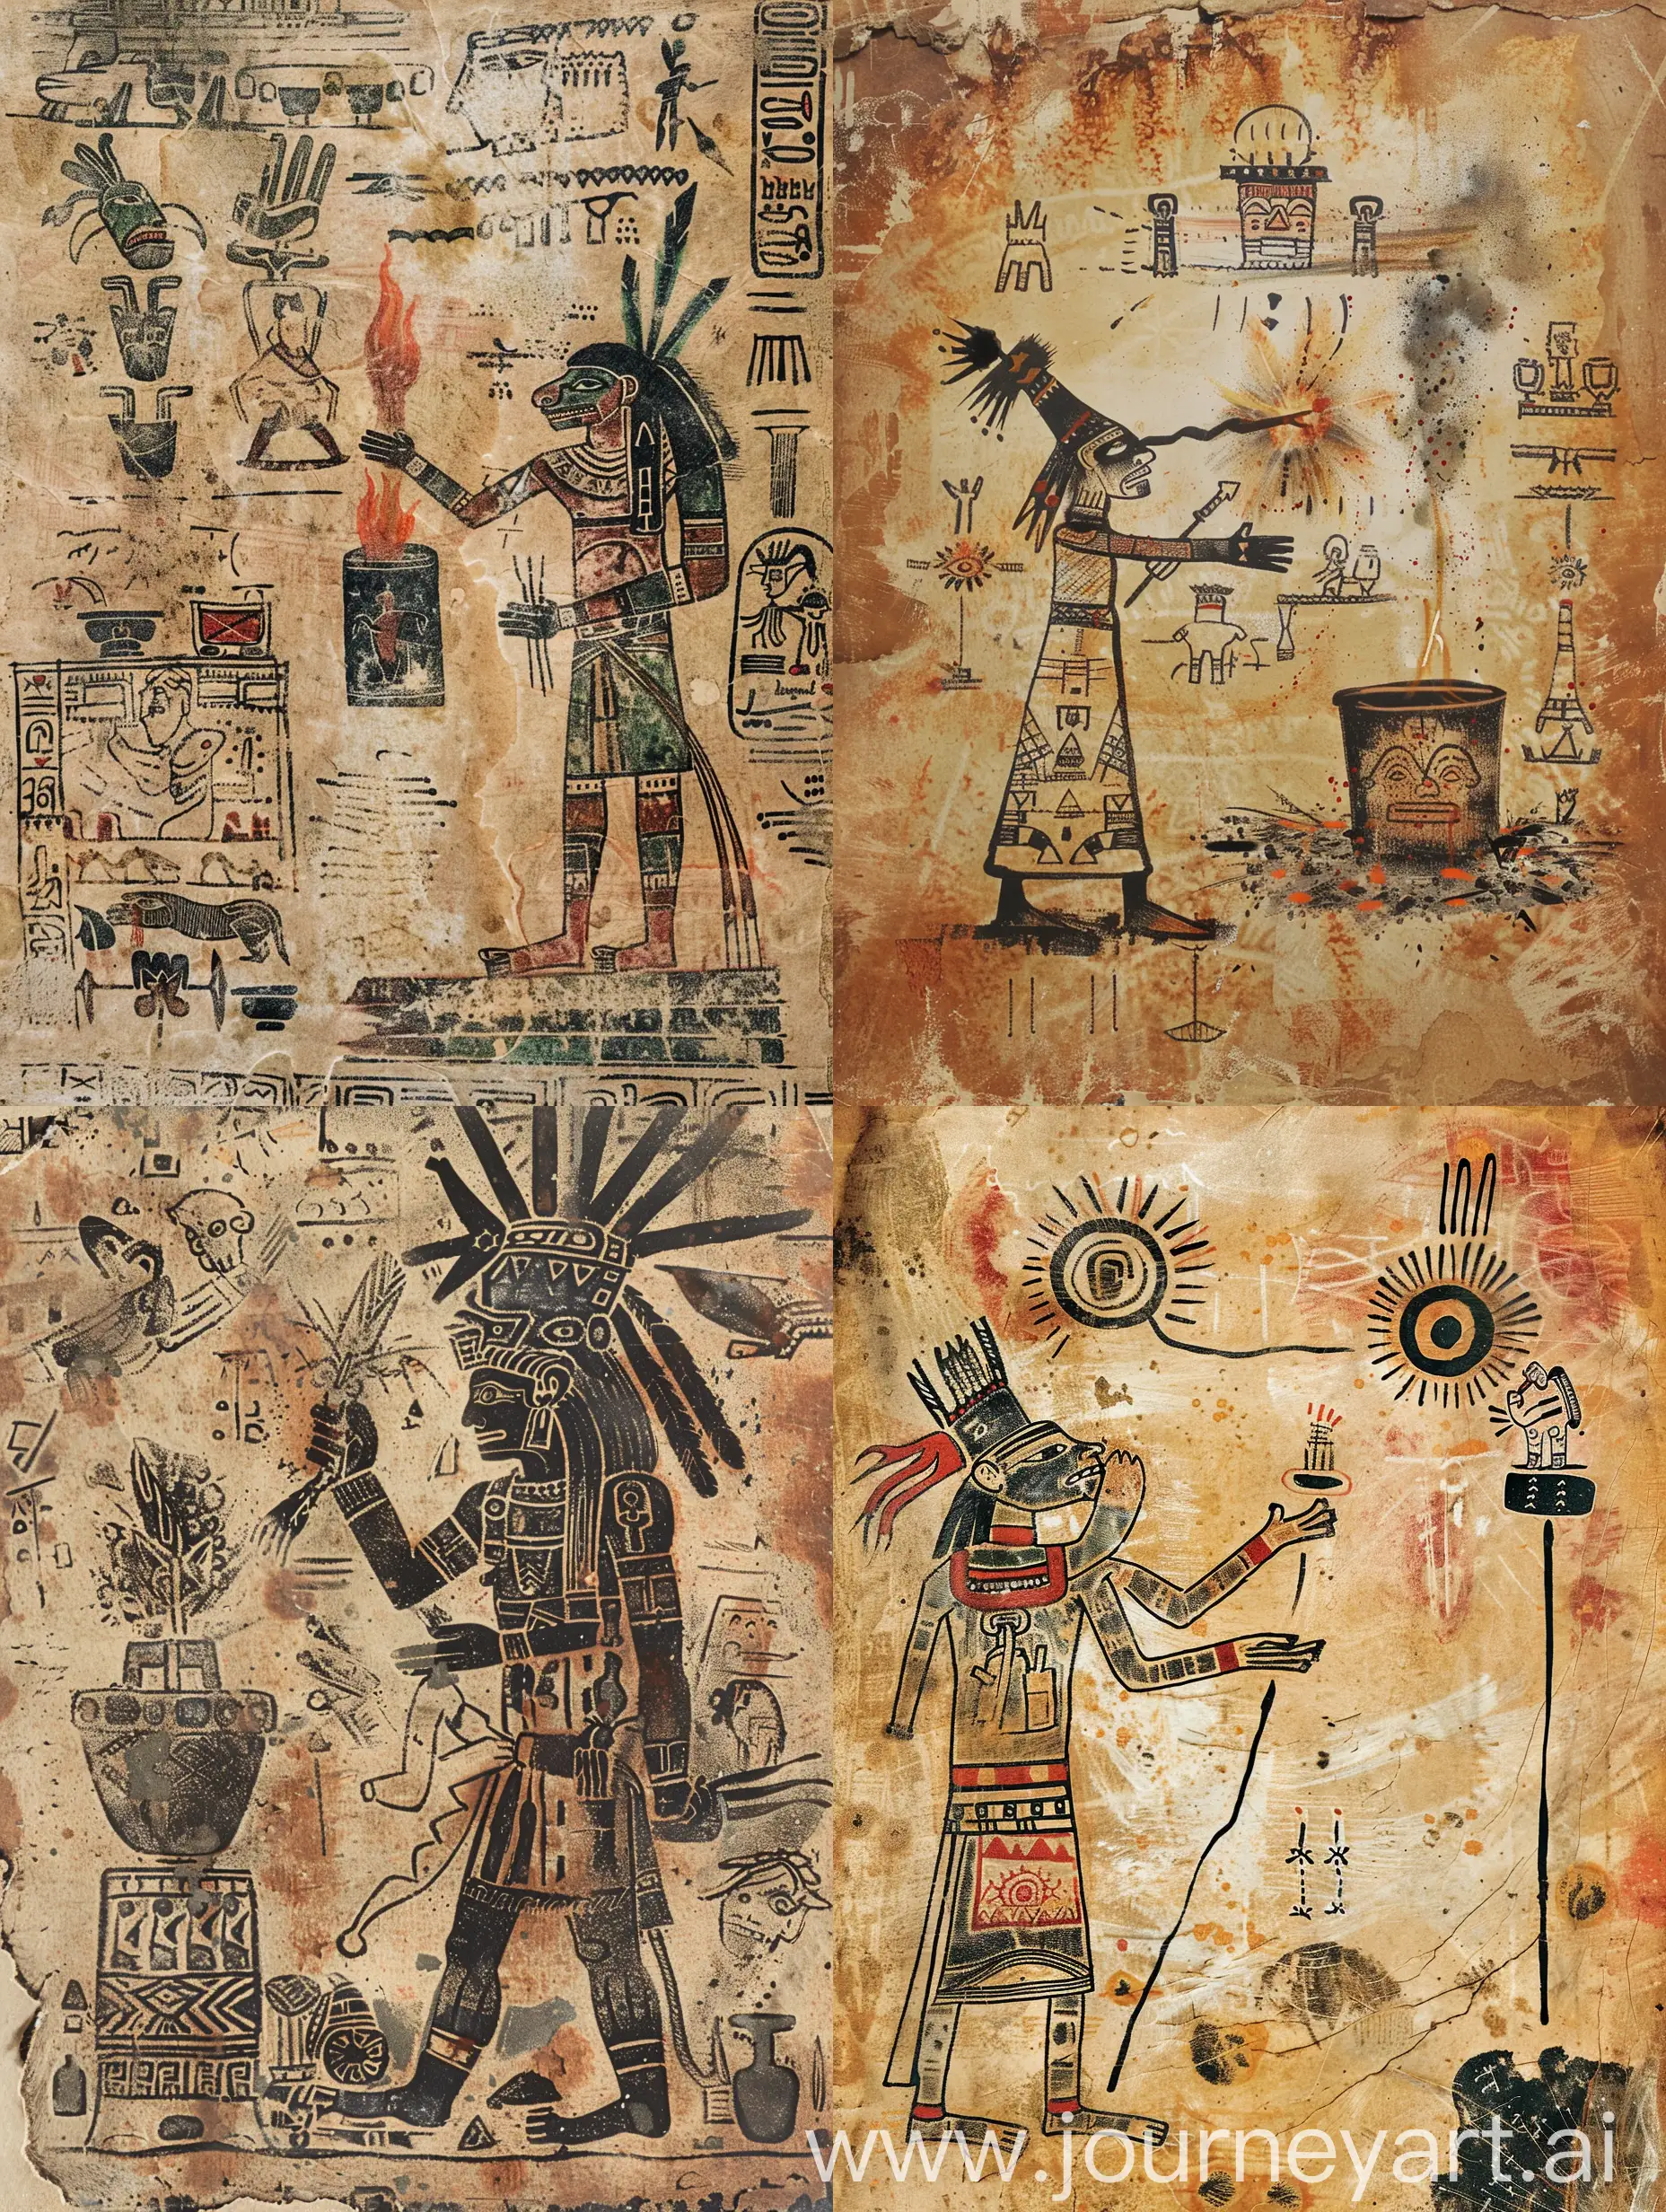 Ancient-Shamans-Petroglyph-Ritual-Depicted-on-Full-Screen-Ancient-Paper